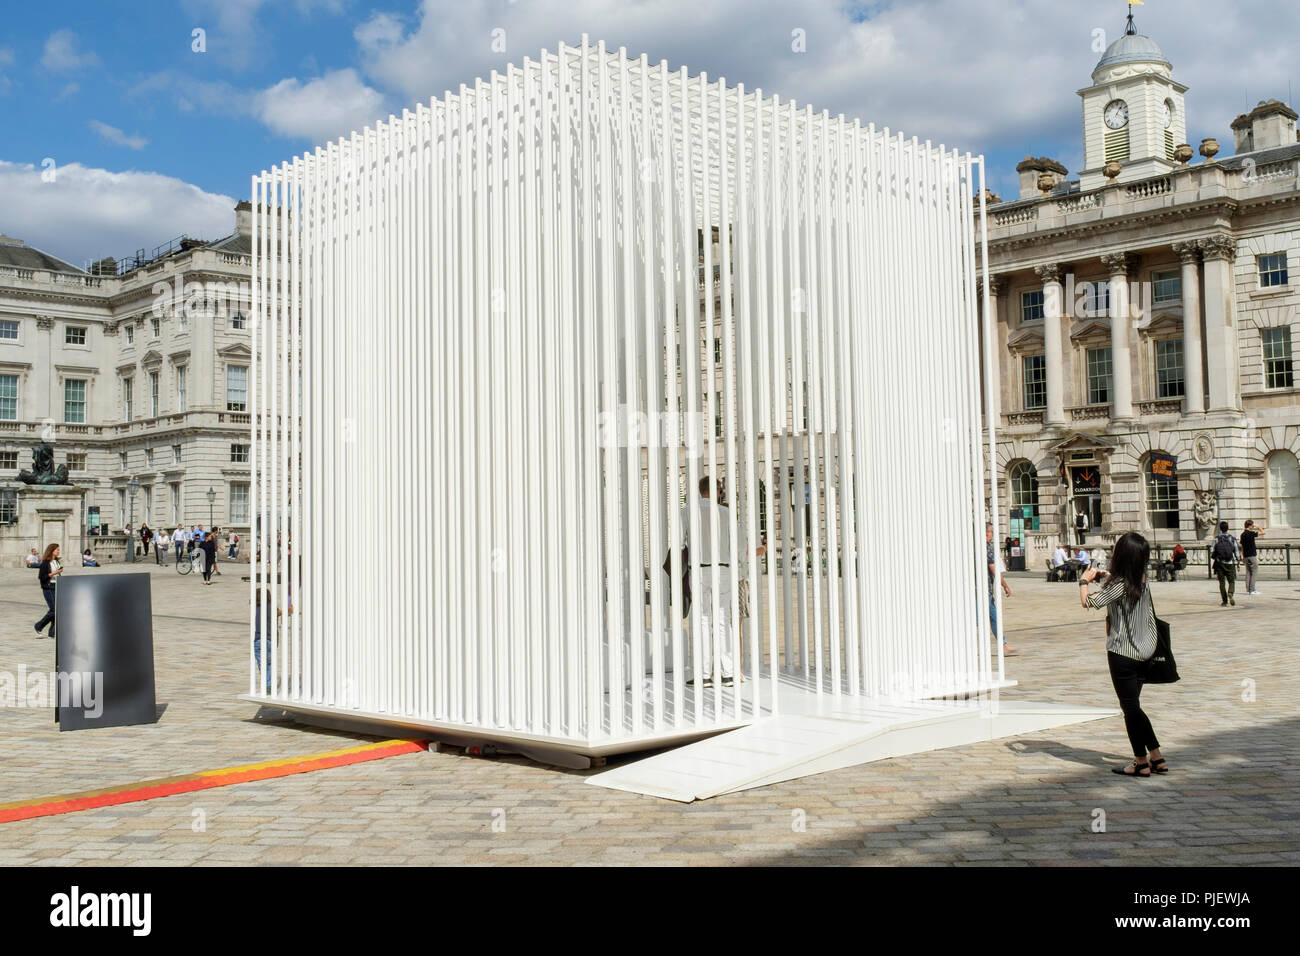 London, UK. 6th September 2018. International design teams from 40 countries are exhibiting interactive design installations on the theme of Emotional States at Somerset House during the London Design Biennale 2018. The exhibition runs from 4-23 September. Pictured: Housemotion (Turkey). Tabanhoglu Architects' installation considers the meaning of home in an age of increasingly transient living. Credit: mark phillips/Alamy Live News Stock Photo